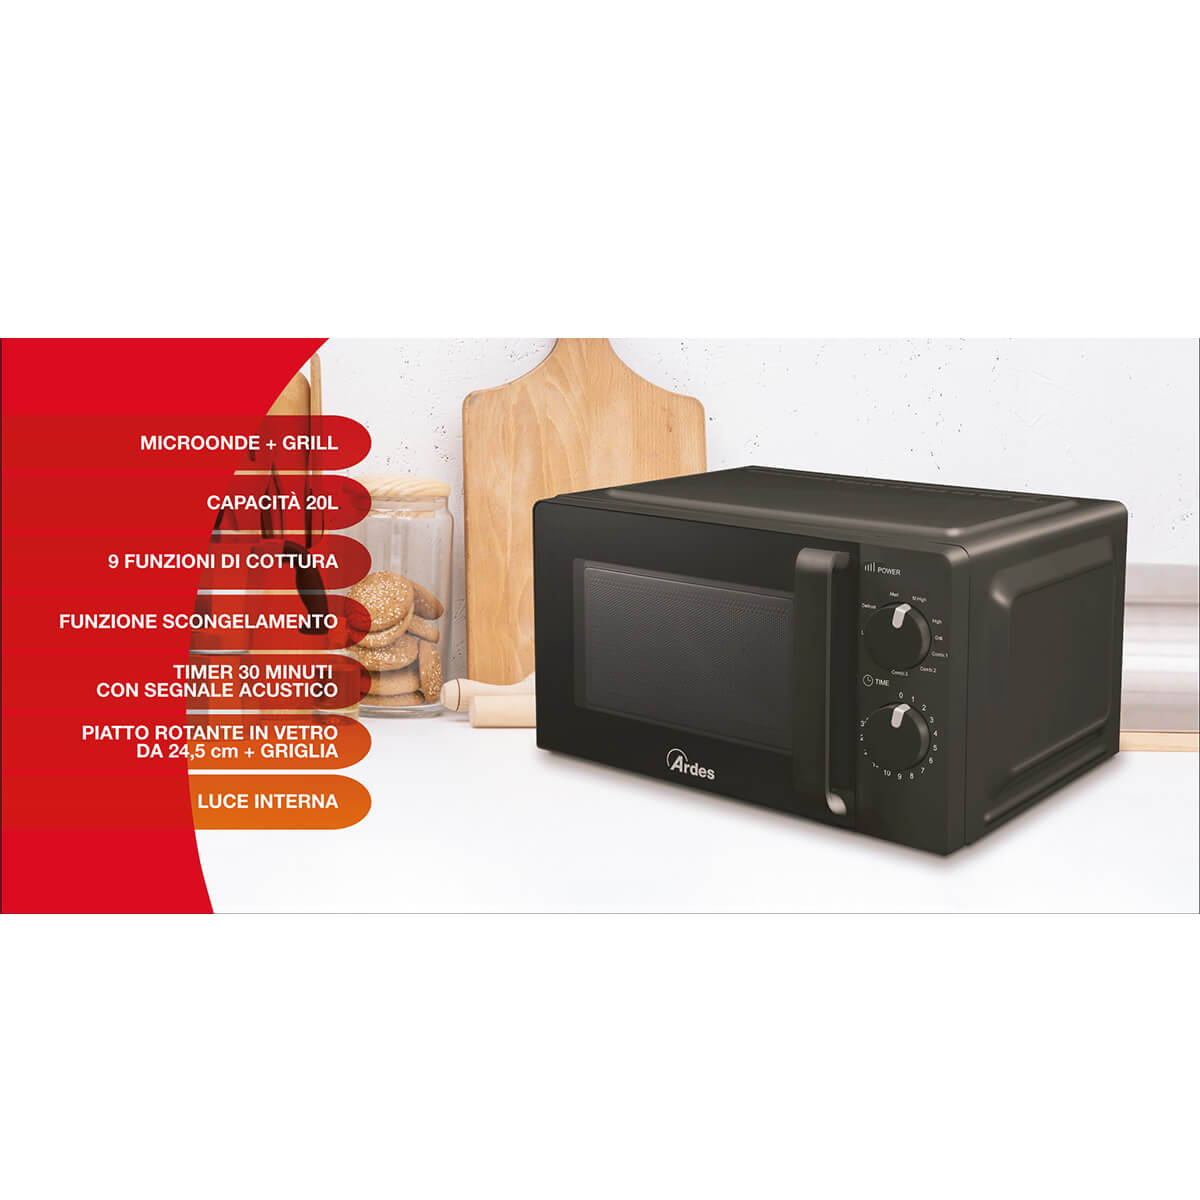 AR6520 - WAVE - FORNO A MICROONDE 20L - Ardes